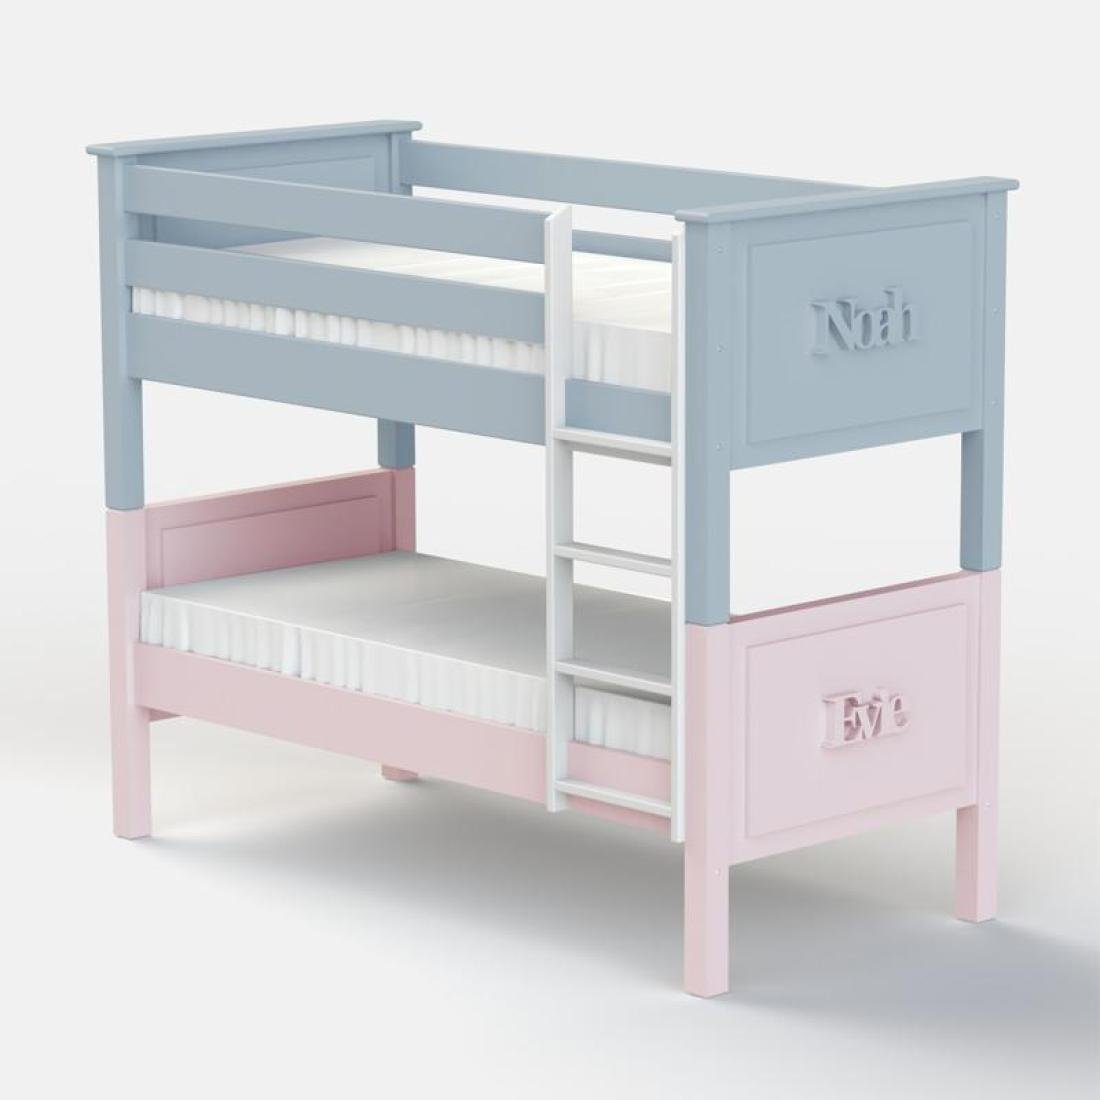 Brother And Sister Bunk Bed Boys, Boy Girl Bunk Beds